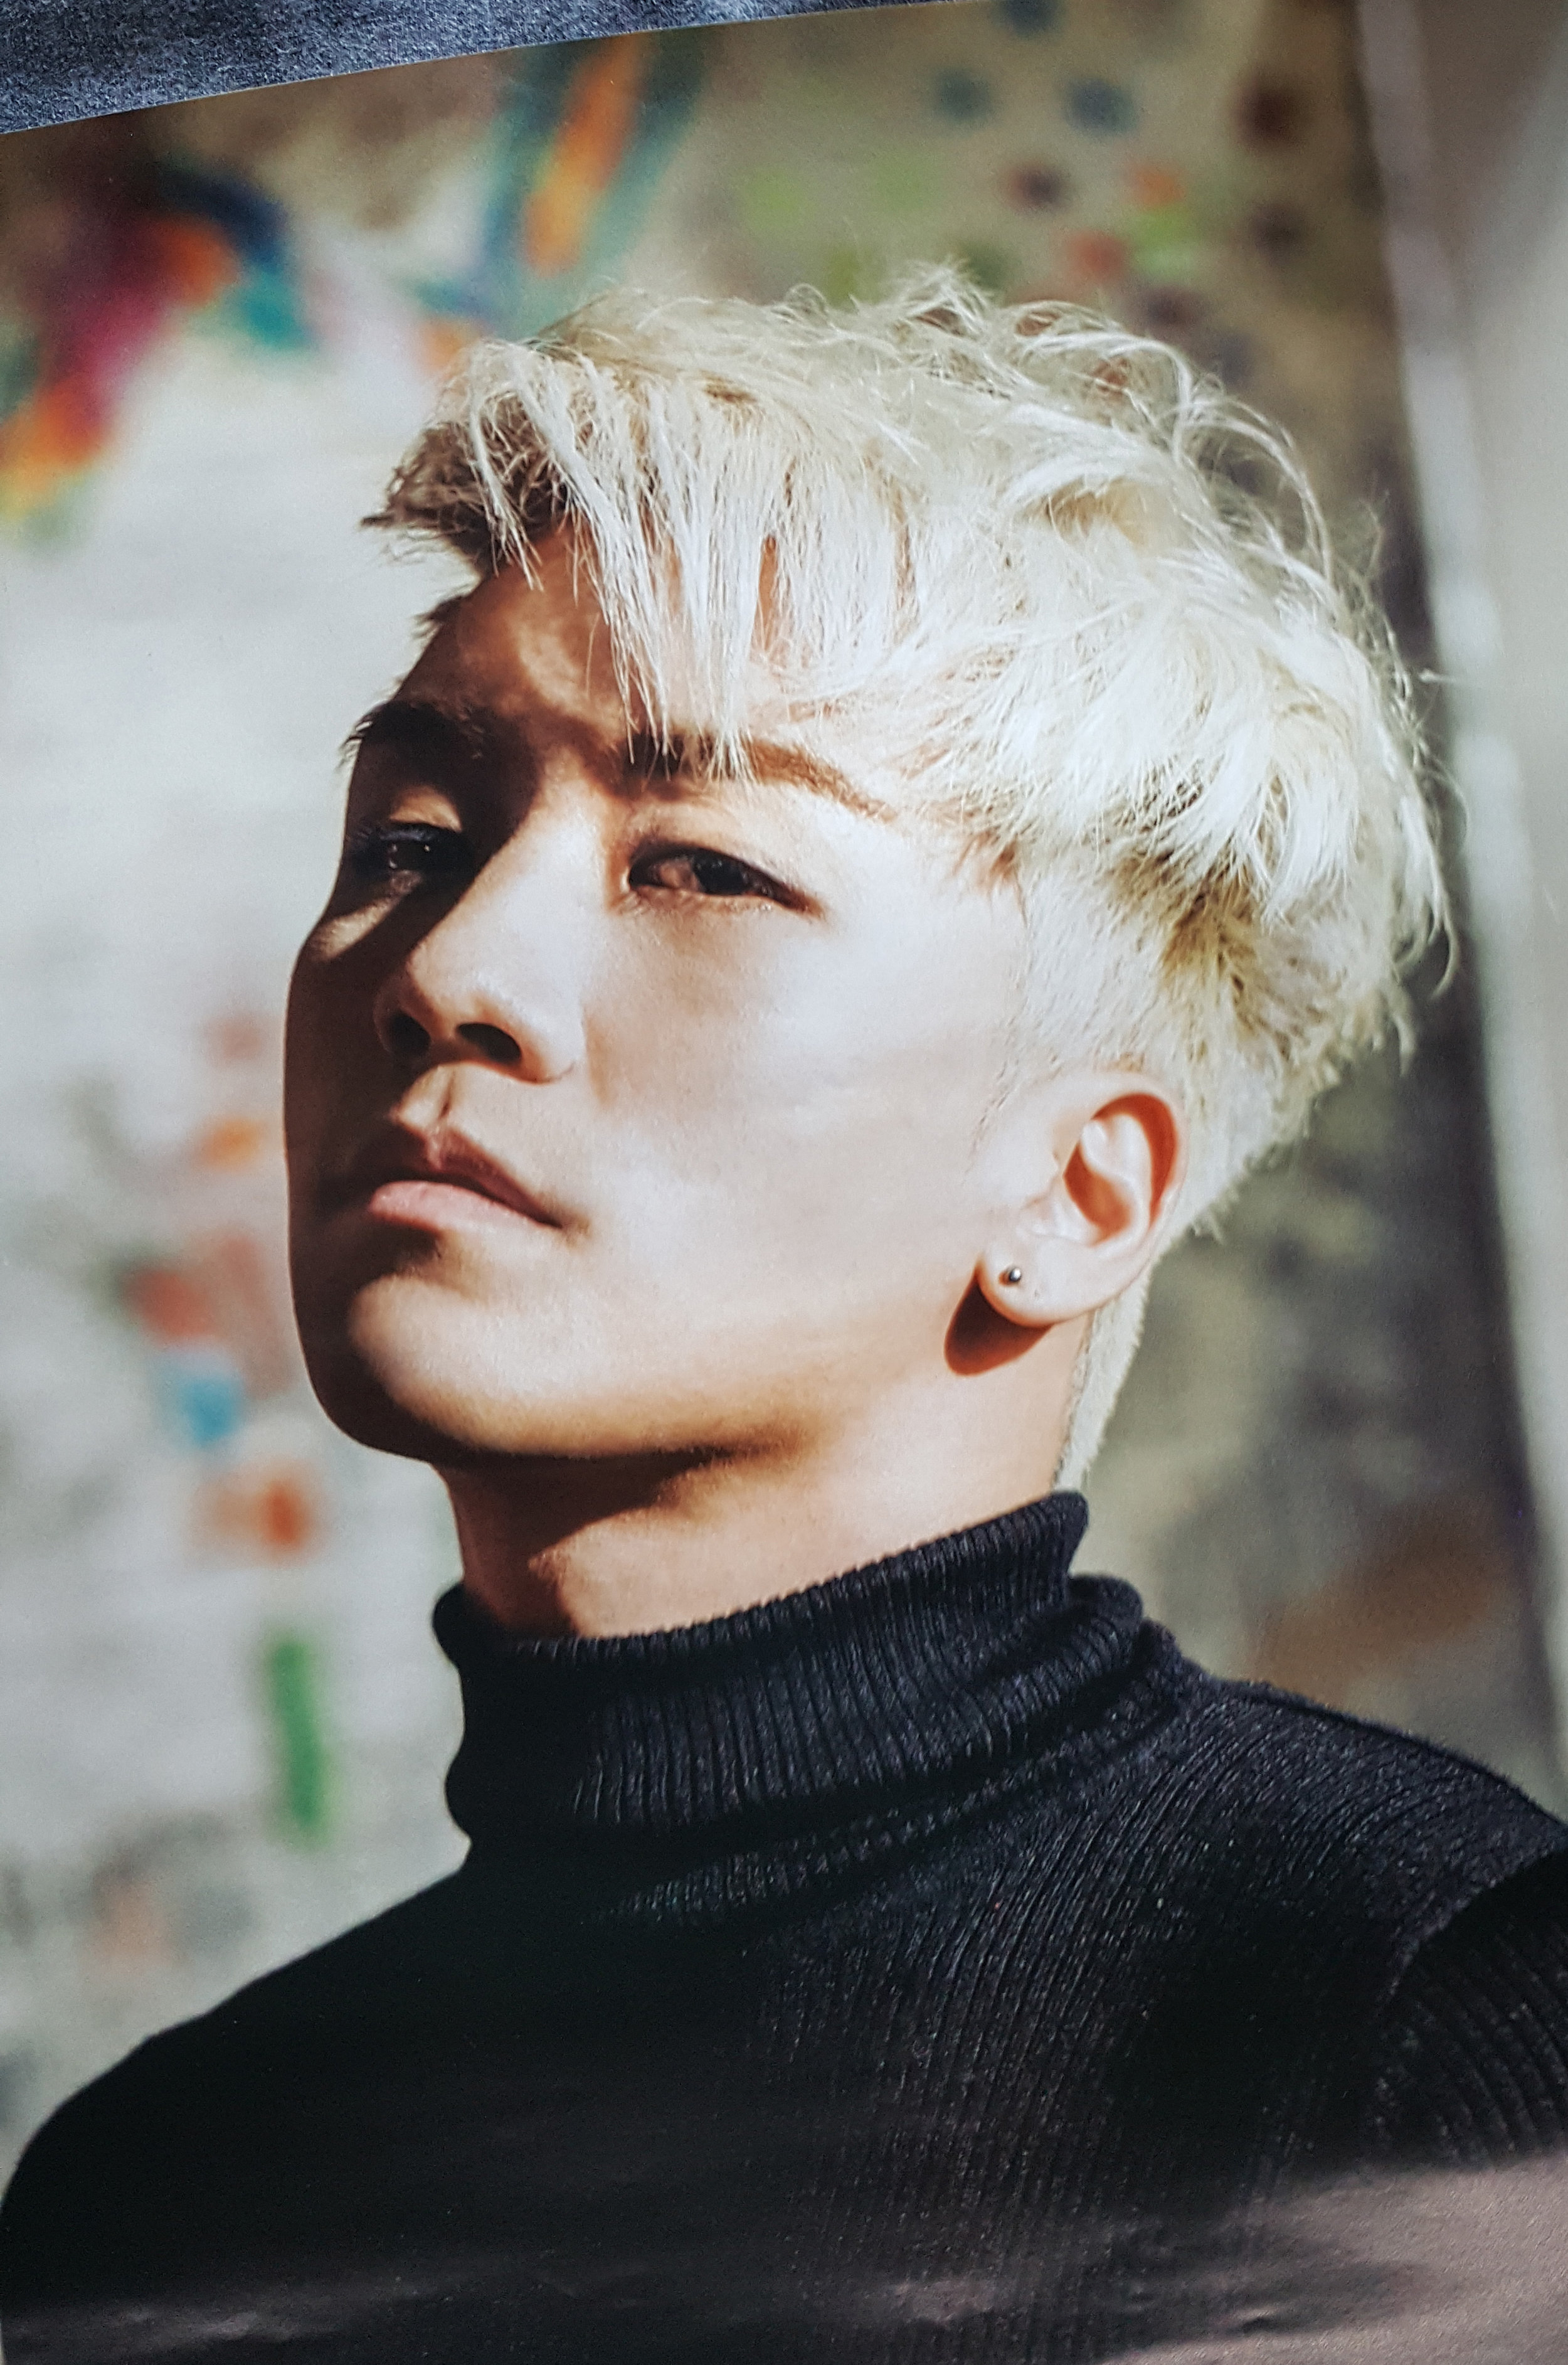 Seungri of Big Bang says he earns 1 per cent of the money G-Dragon does |  South China Morning Post